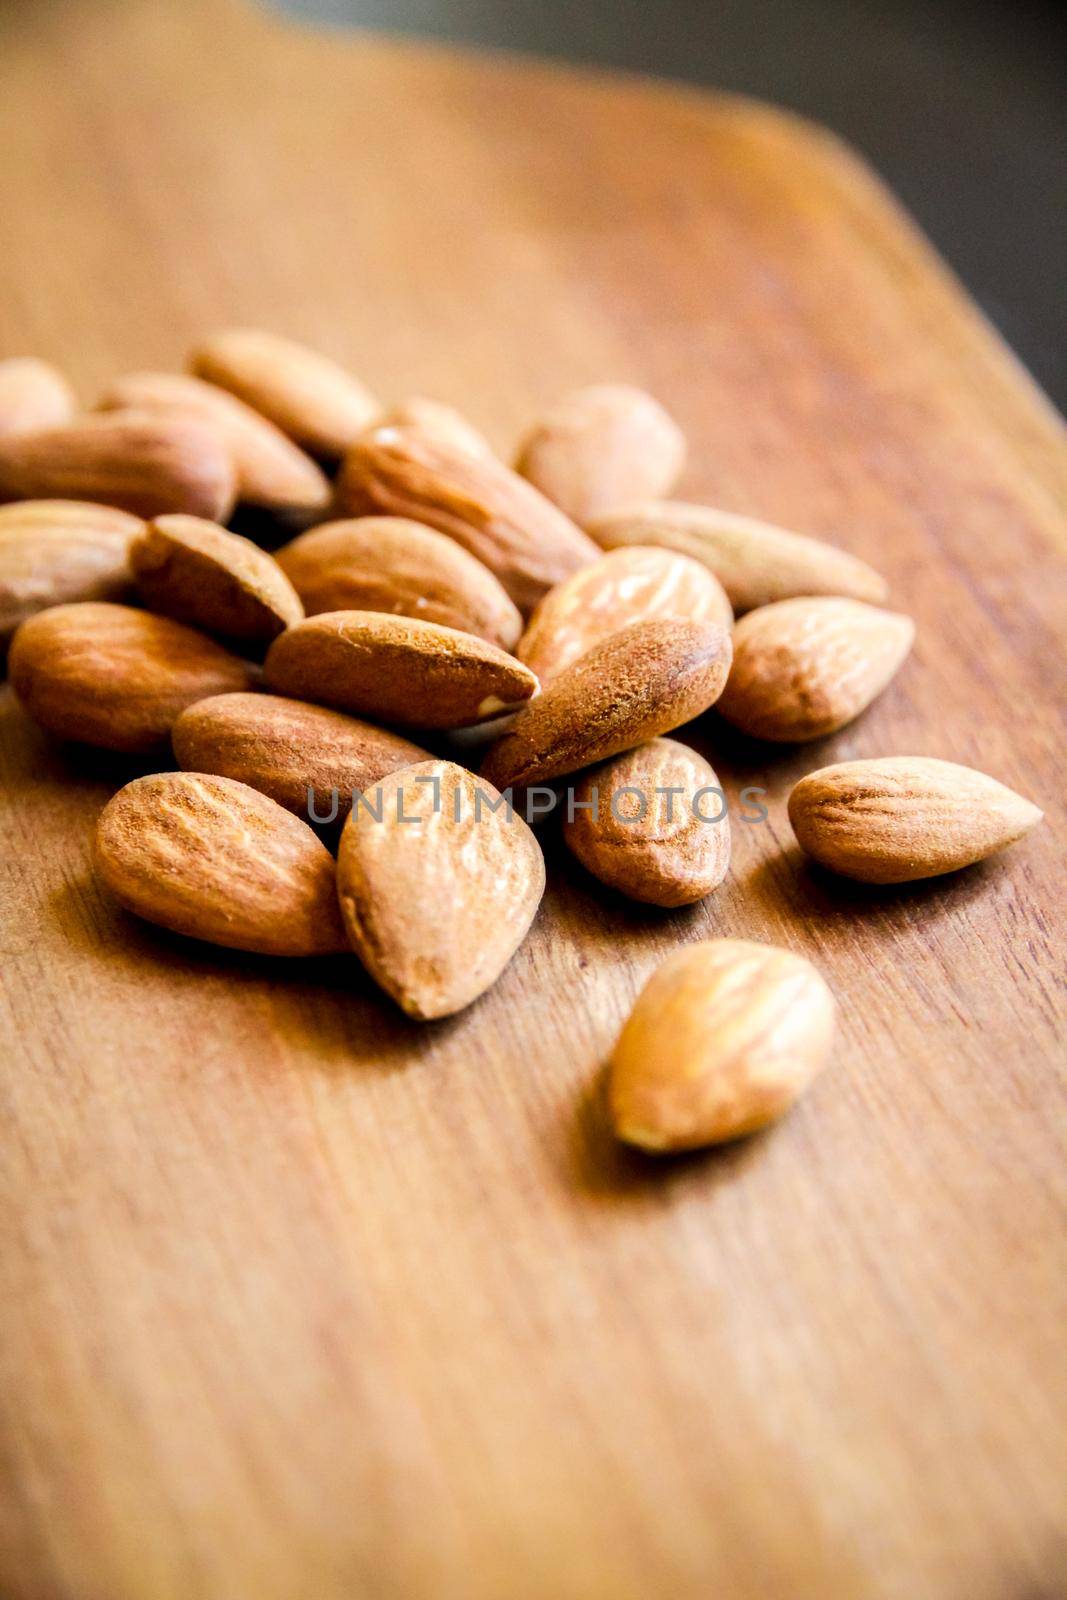 Almonds on a wooden cutting board by daboost